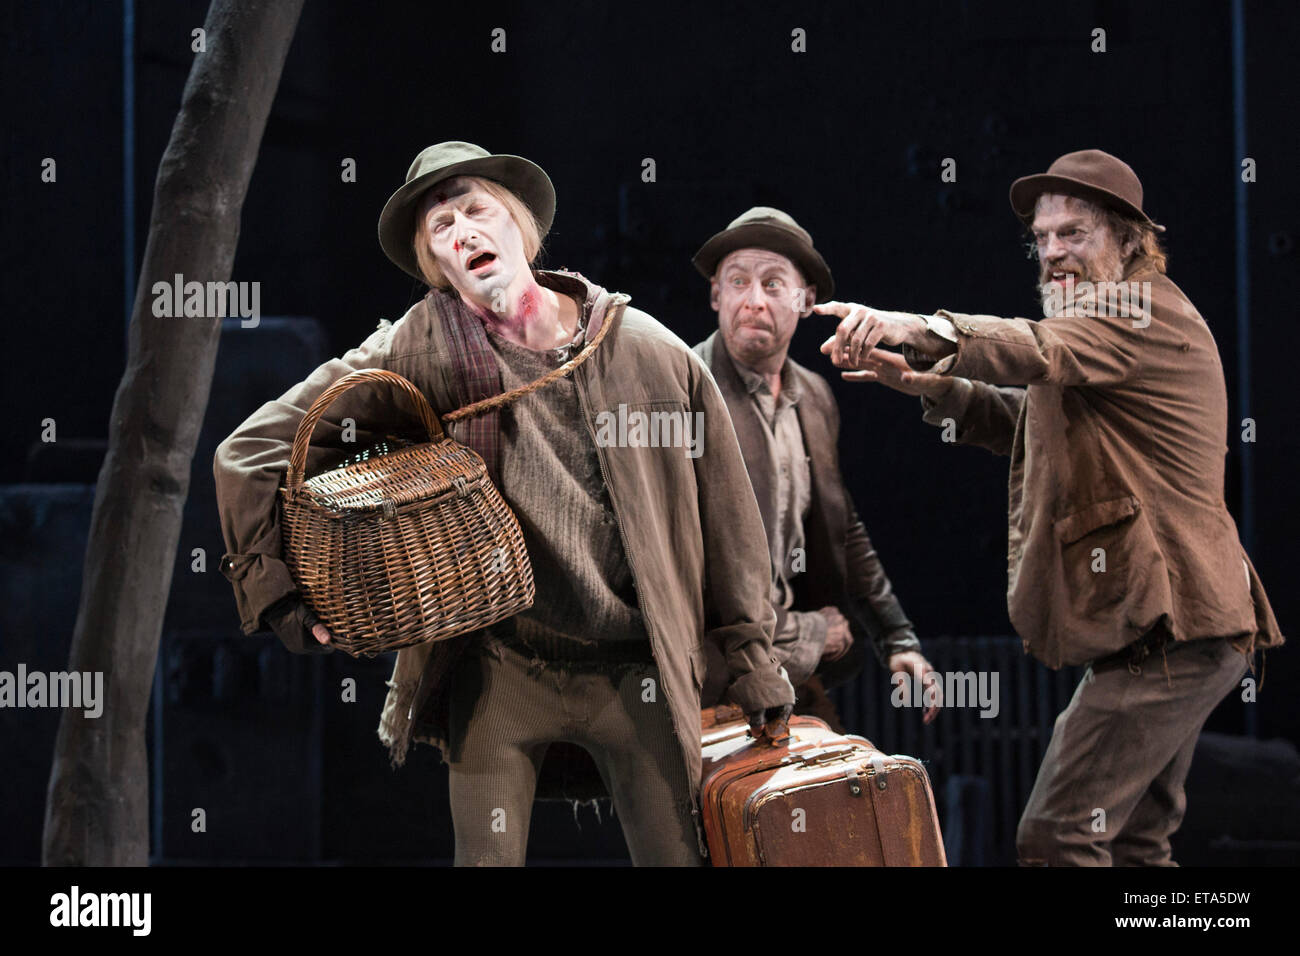 L-R: Luke Mullins as Lucky, Richard Rockburgh as Estragon and Hugo Weaving as Vladimir. Actors Richard Roxburgh and Hugo Weaving star in Samuel Beckett's 'Waiting for Godot' at the Barbican Theatre. Part of the International Beckett Season, this Sydney Theatre Company play is directed by Andrew Upton. With Luke Mullins as Luke, Philip Quast as Pozzo, Richard Roxburgh as Estragon and Hugo Weaving as Vladimir. Performances from 4 to 13 June 2015 at the Barbican Theatre. Stock Photo